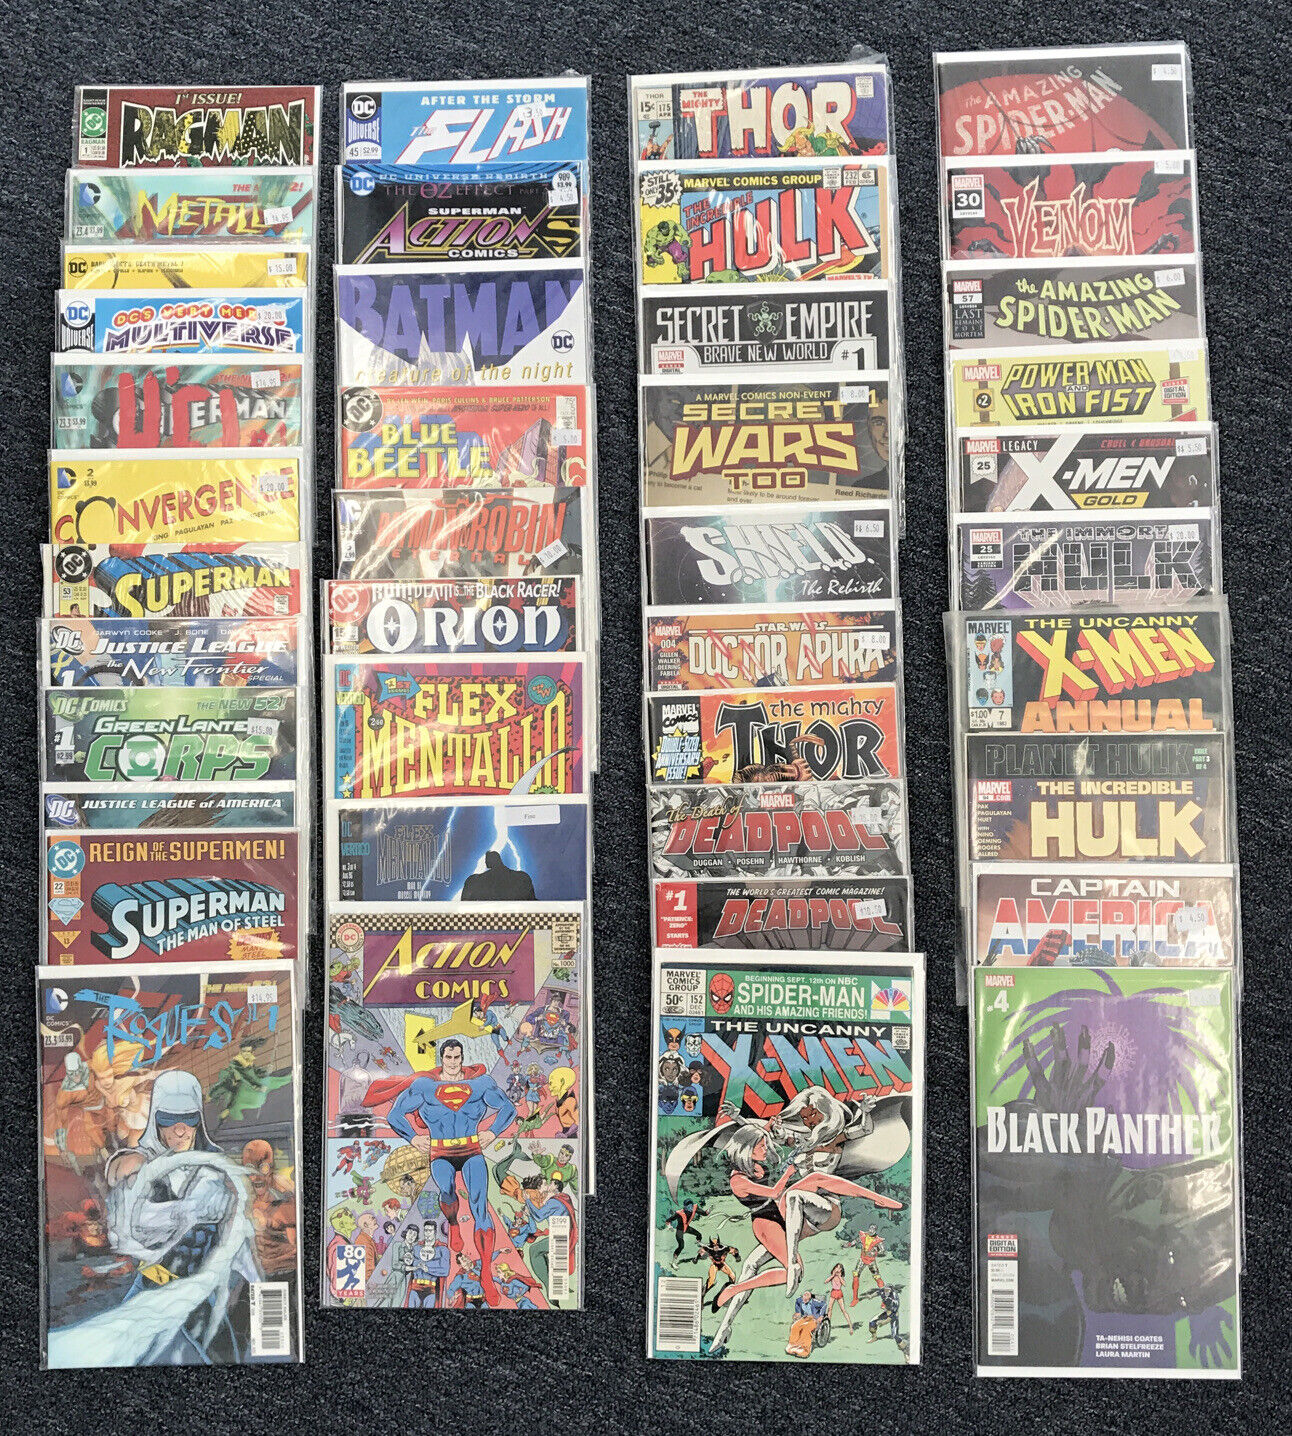 HUGE PREMIUM 100 COMIC BOOK LOT-MARVEL & DC-FREE SHIPPING BAGGED AND BOARDED